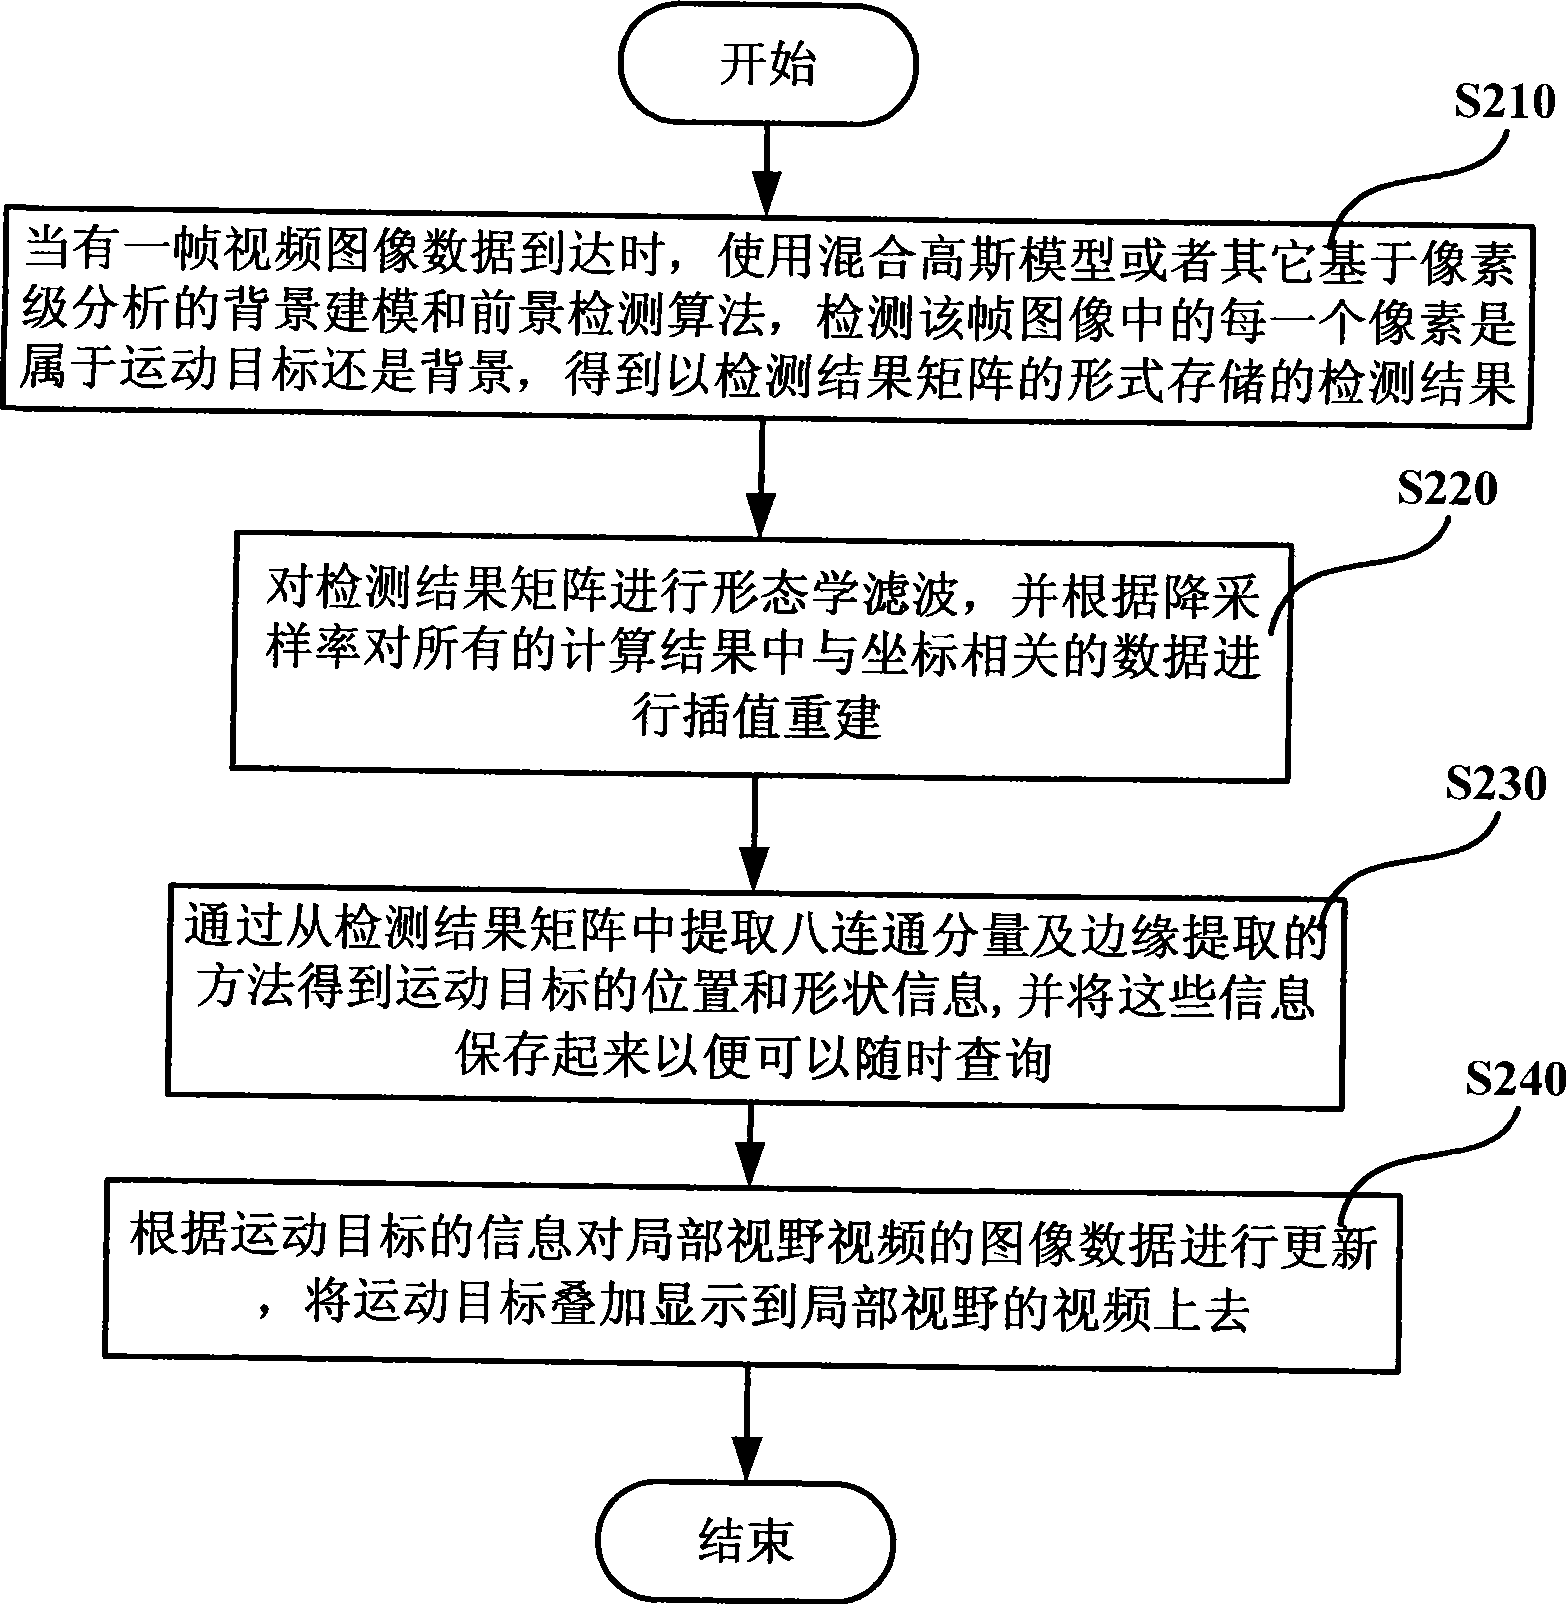 Method and system for amalgamation process and display of multipath video information when monitoring